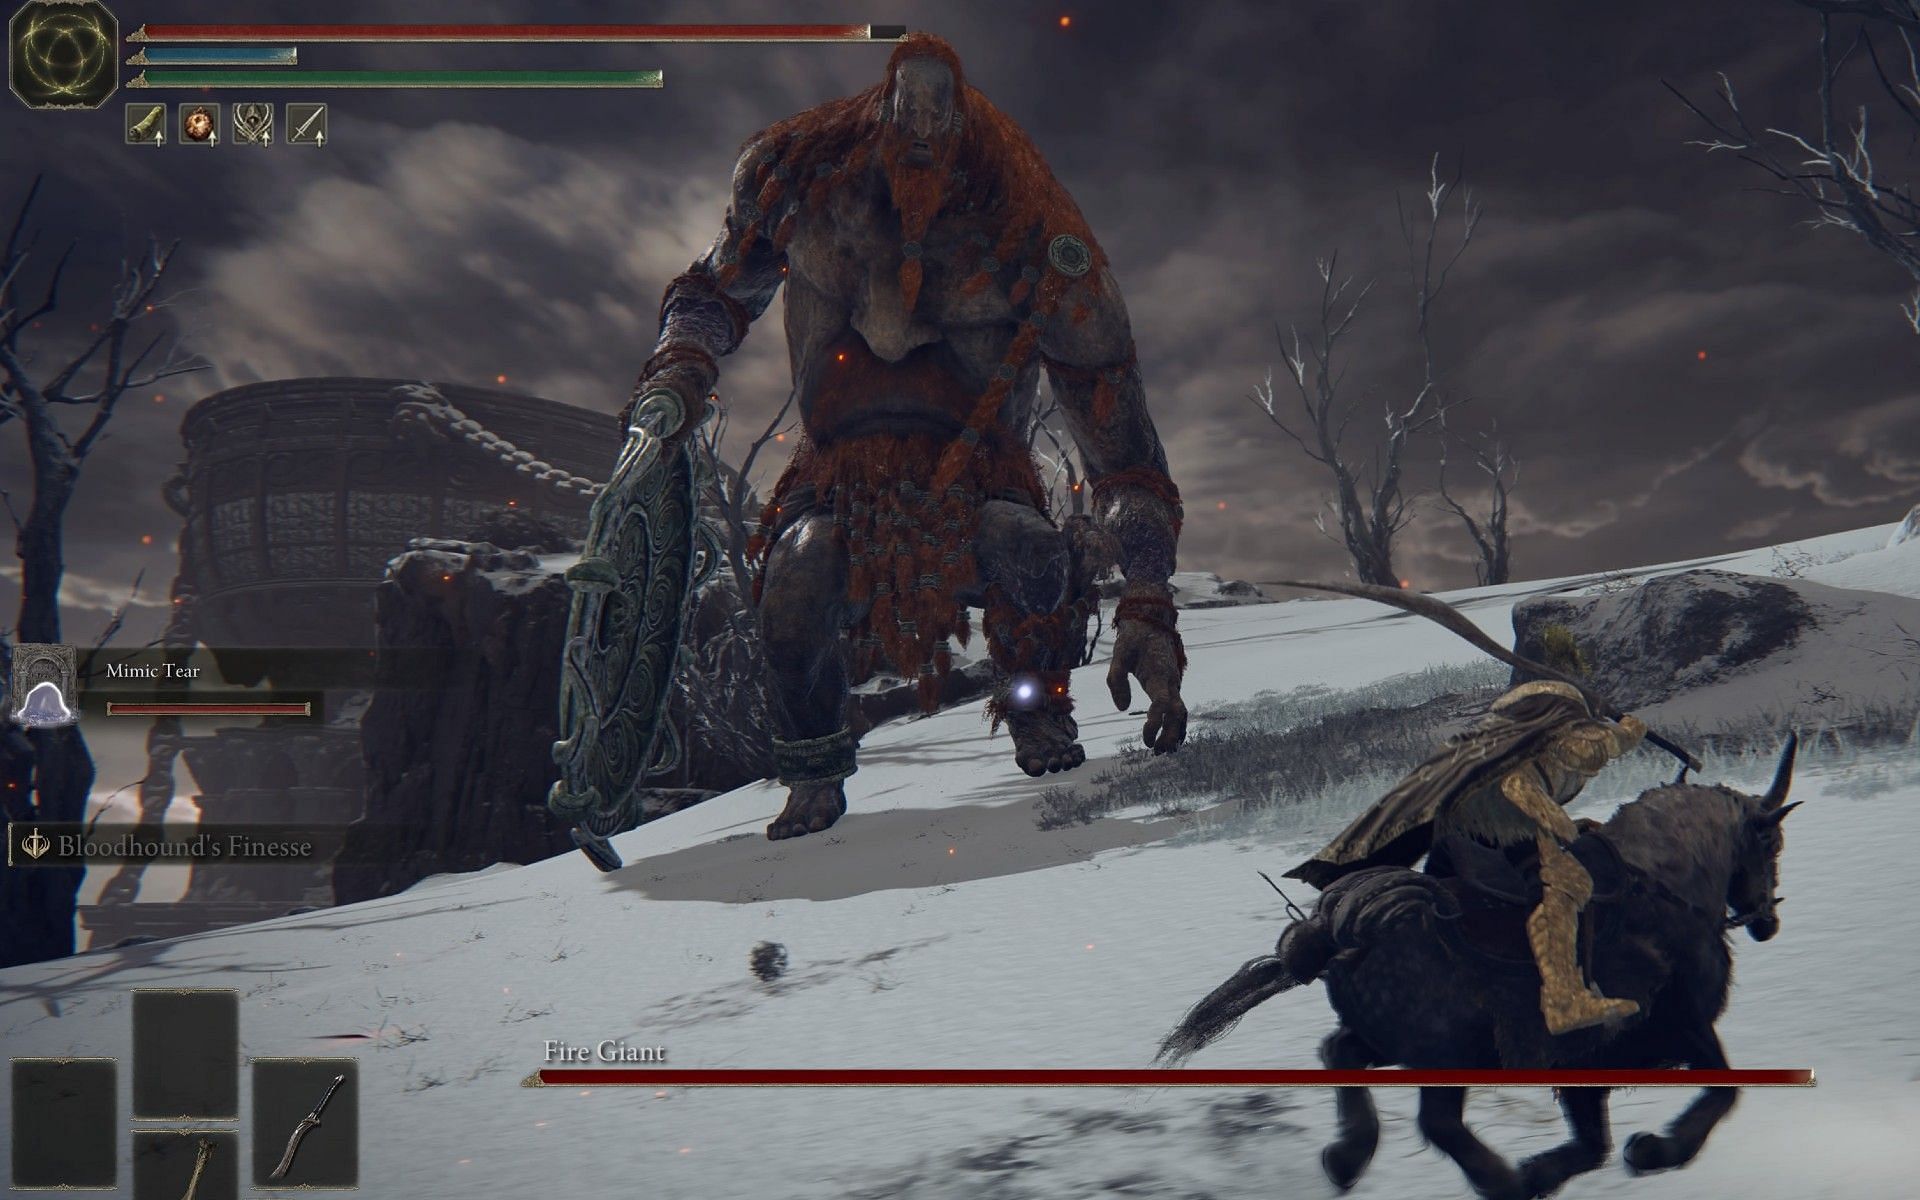 Players can use the mount to get close to the Fire Giant. (Image via FromSoftware)